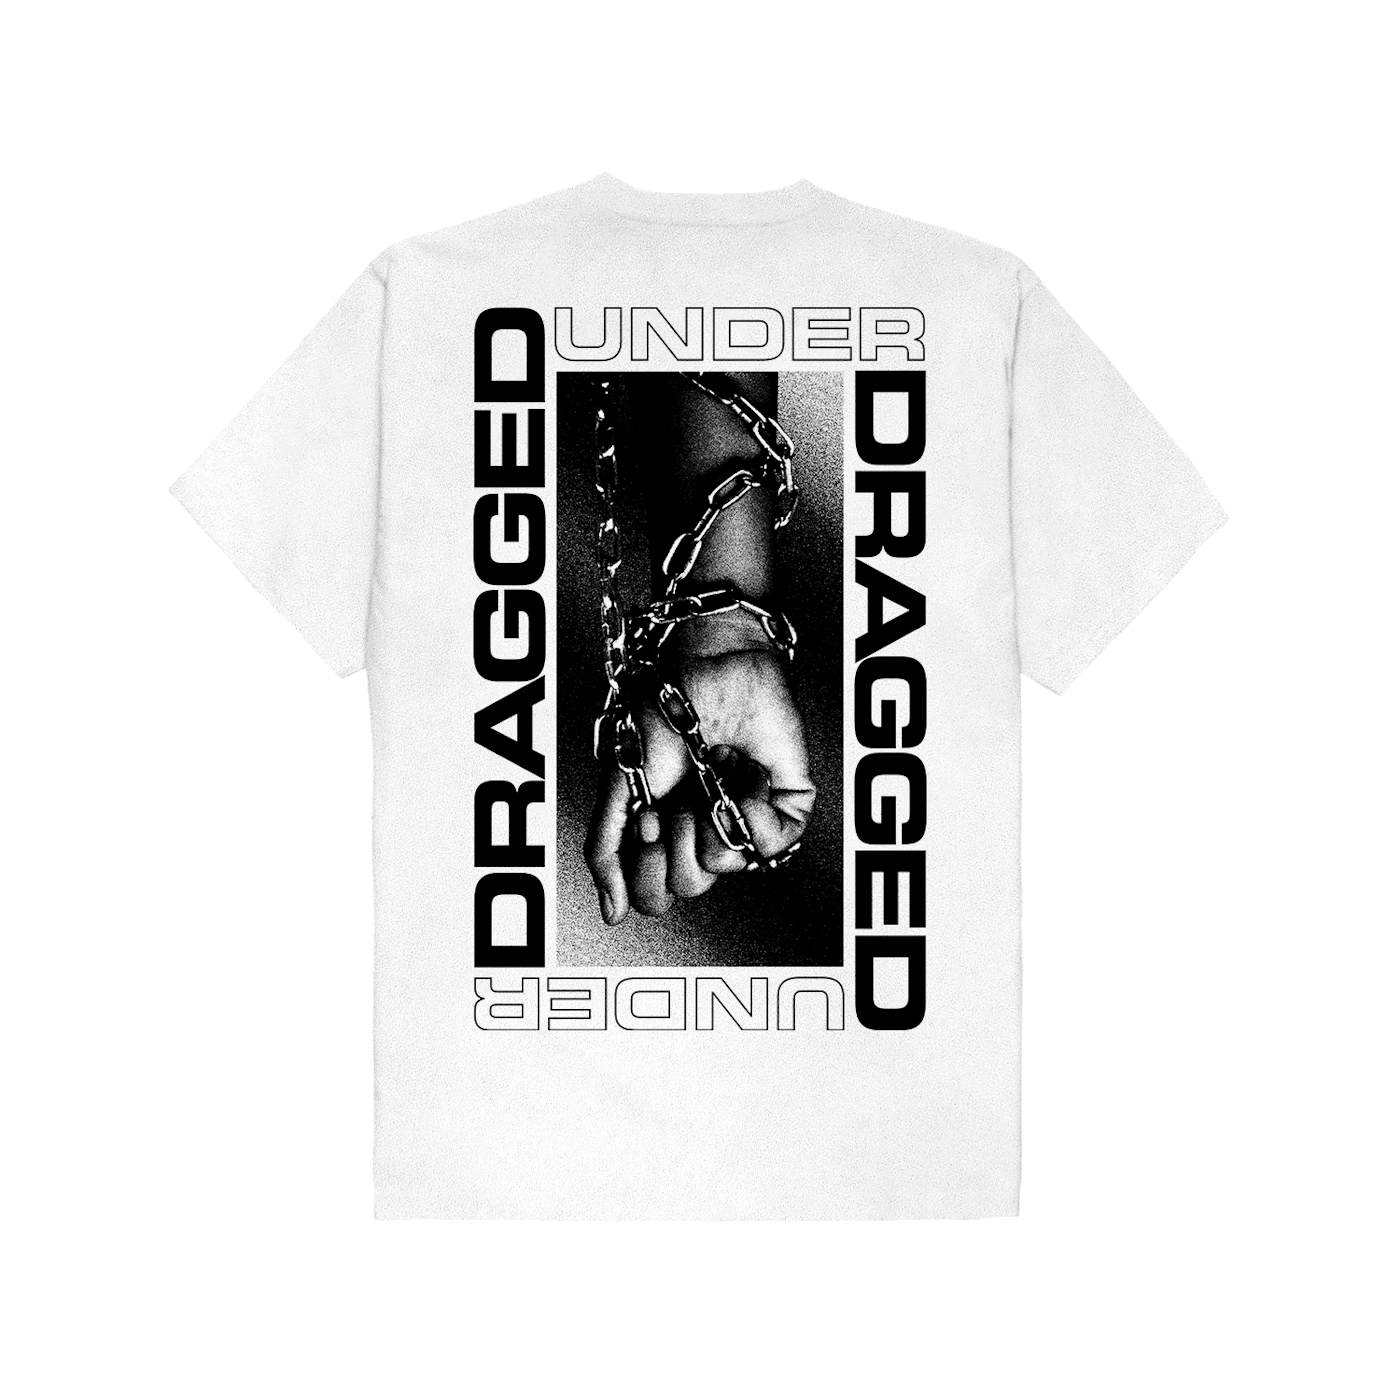 Dragged Under - Chained Tee